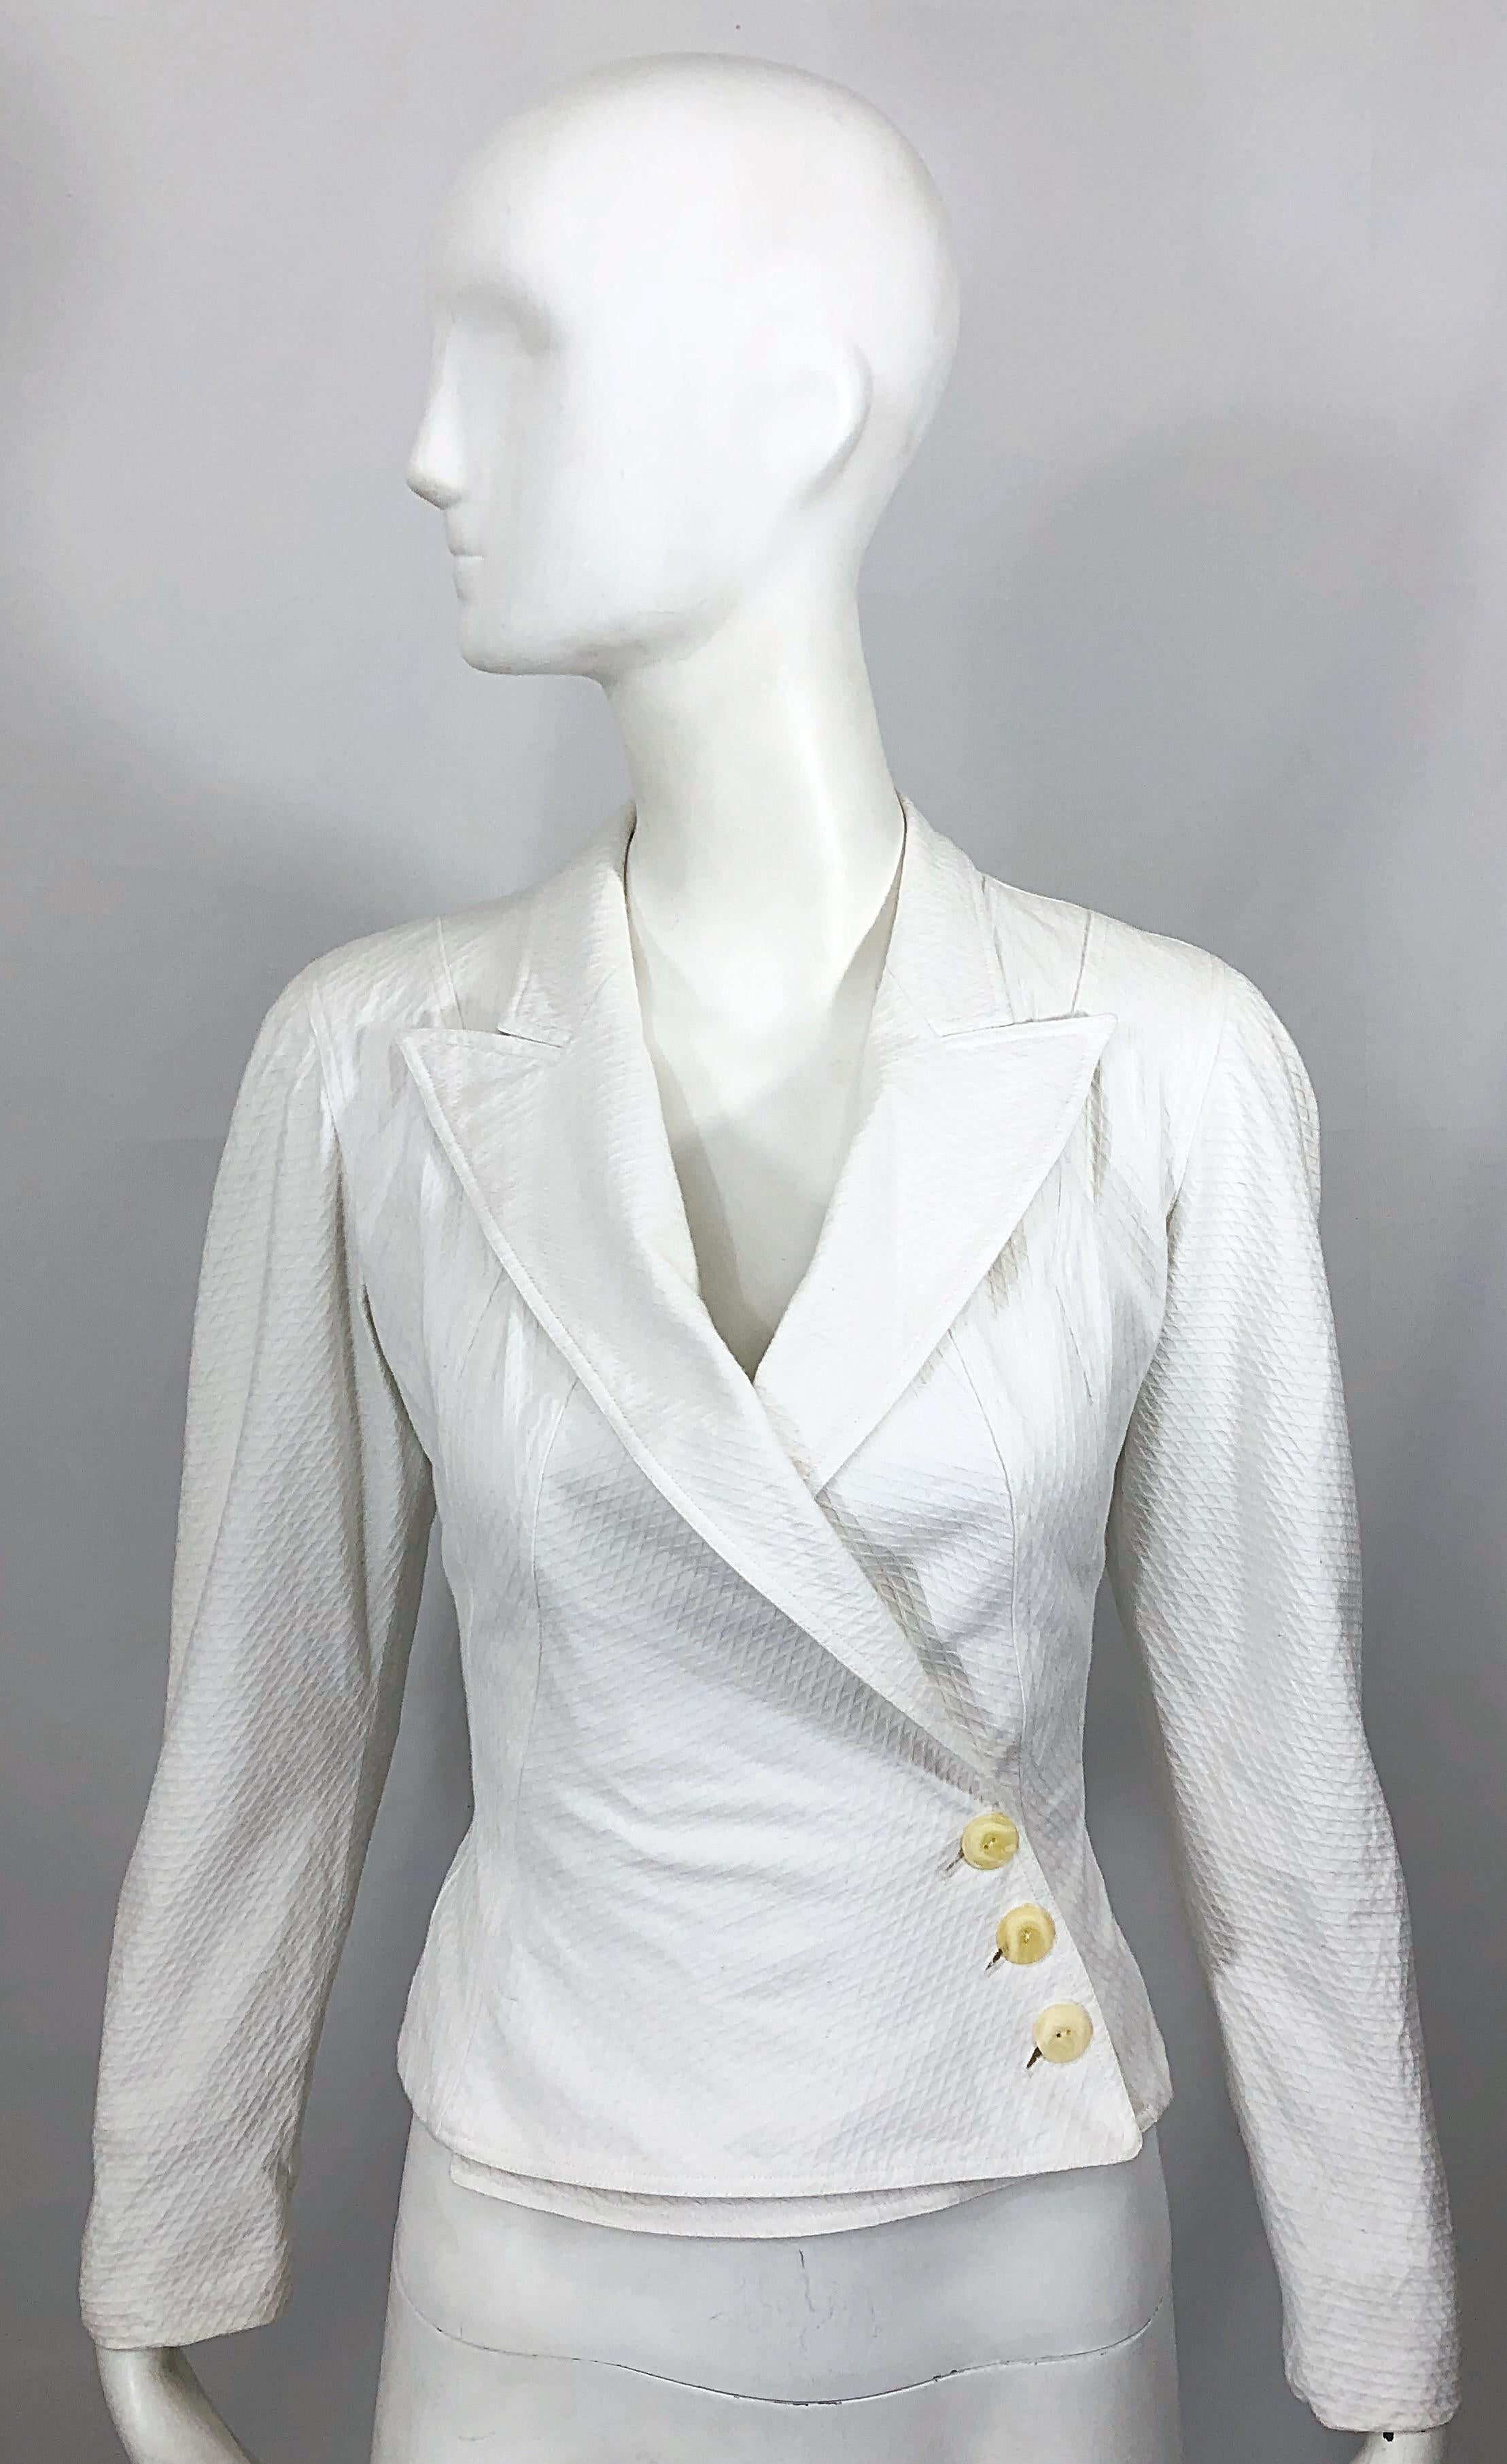 Timeless vintage 80s AZZEDINE ALAIA stark white pique cotton double breasted crop blazer jacket! Features a textured sturdy, yet soft pique cotton. Double breasted style with hidden interior button at inner waist. 
Three ivory buttons at left waist.